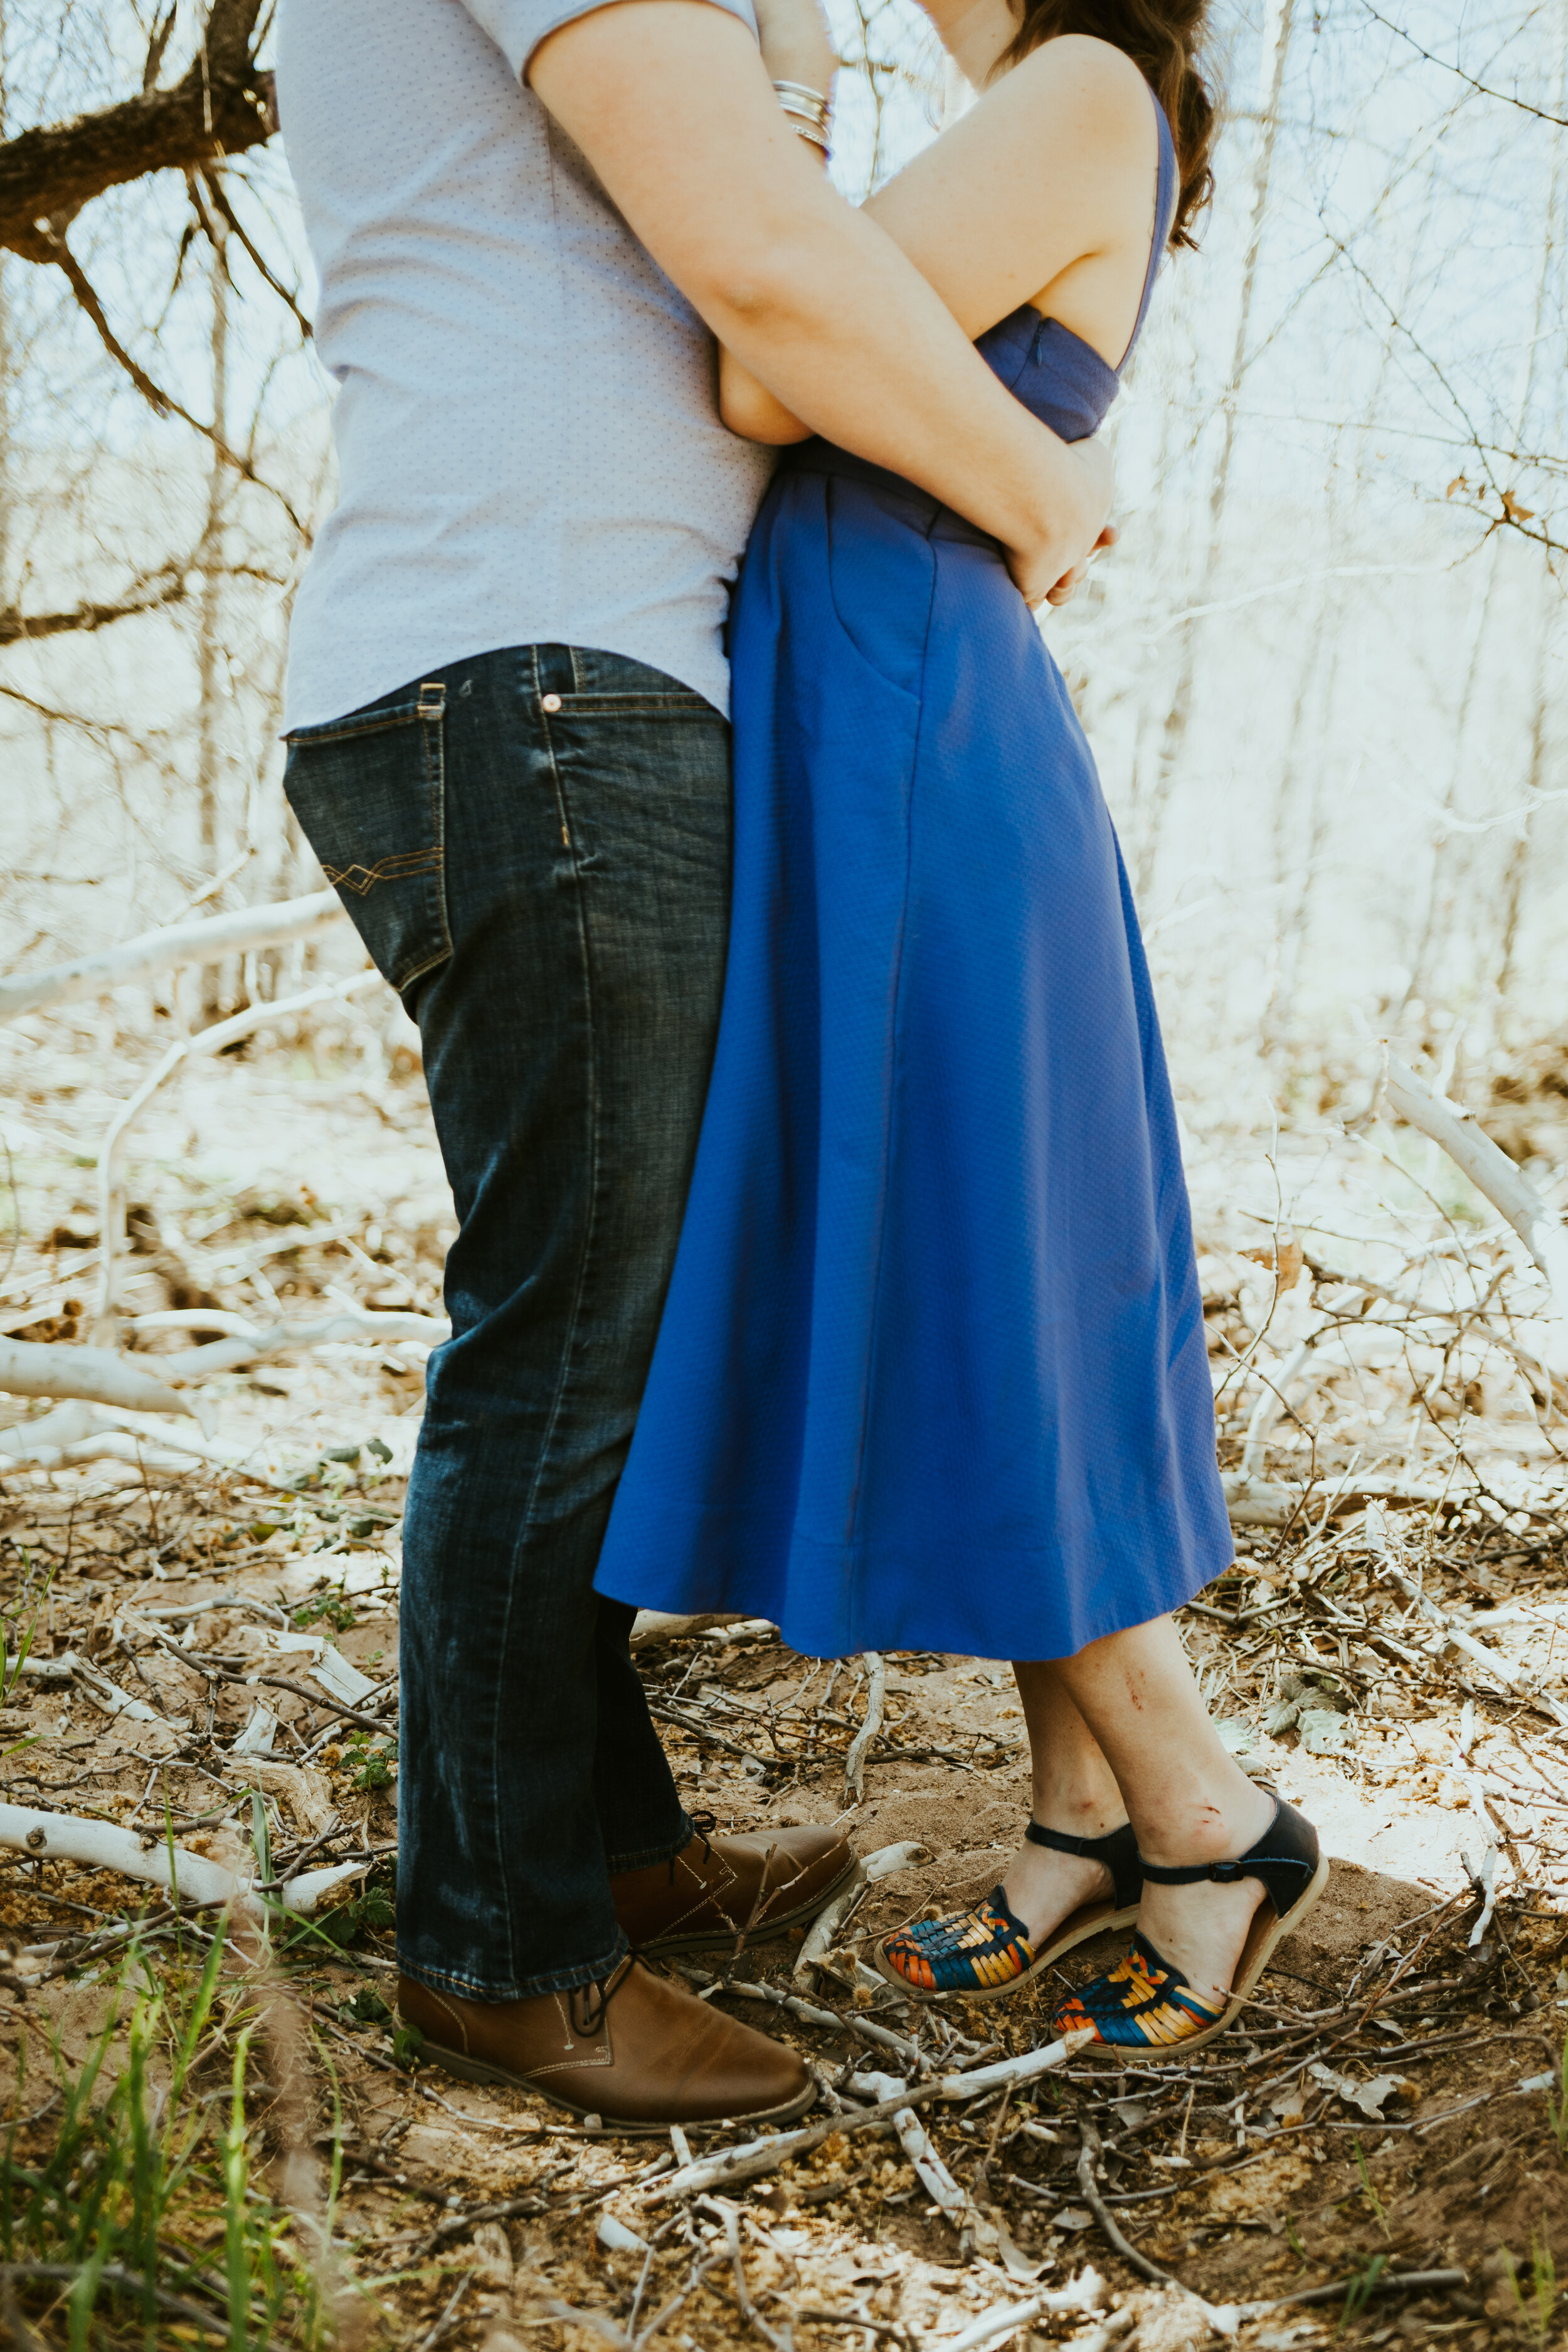 red rock crossing sedona arizona cathedral rock crescent moon ranch couple photos engagement photo outfit inspiration couple posing ideas midday photos-5.jpg